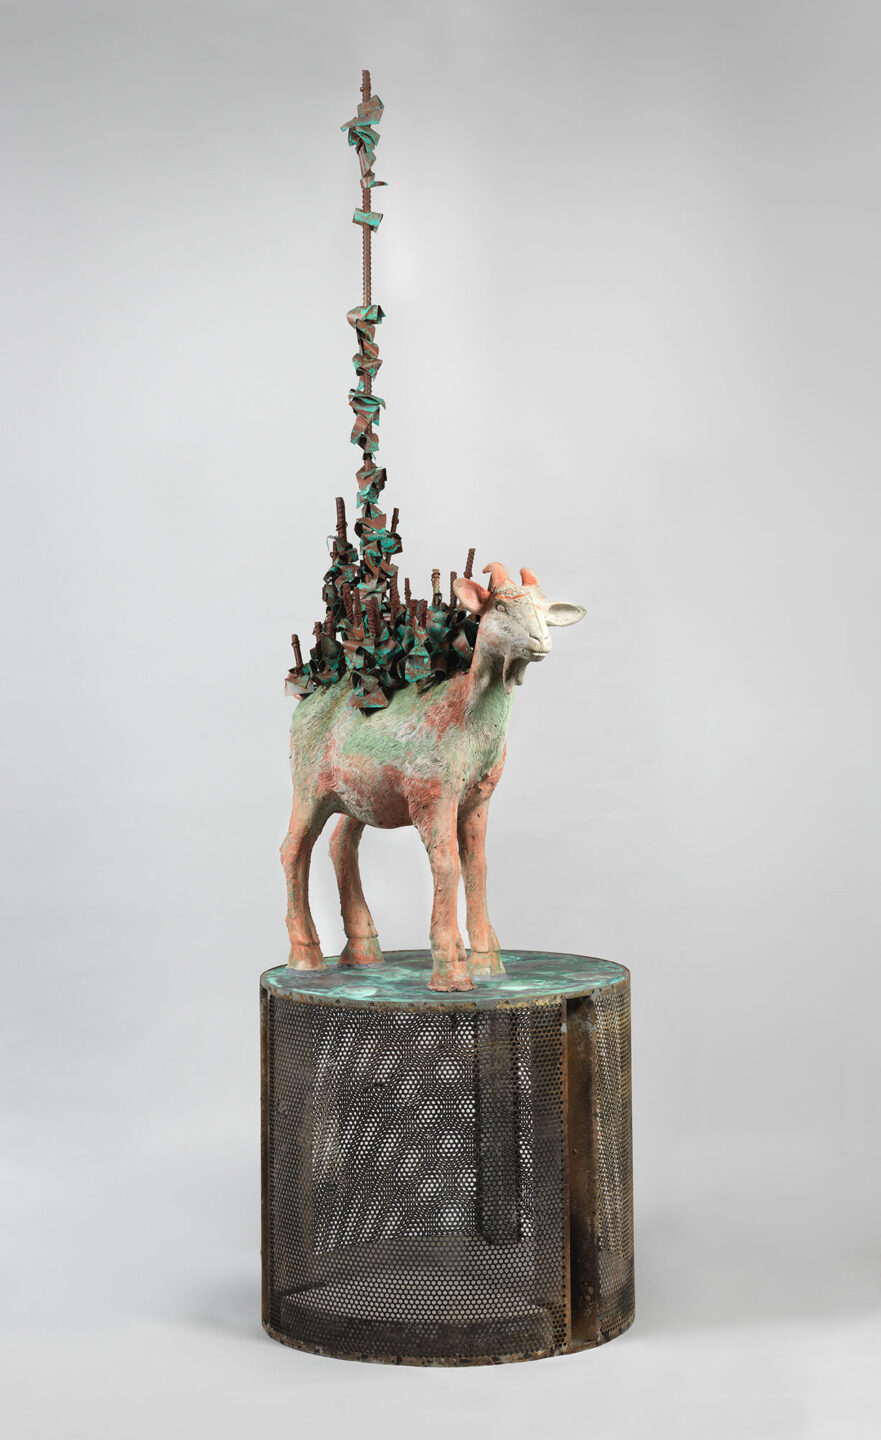 A cast bronze sculpture of a goat on top of a washing machine drum.